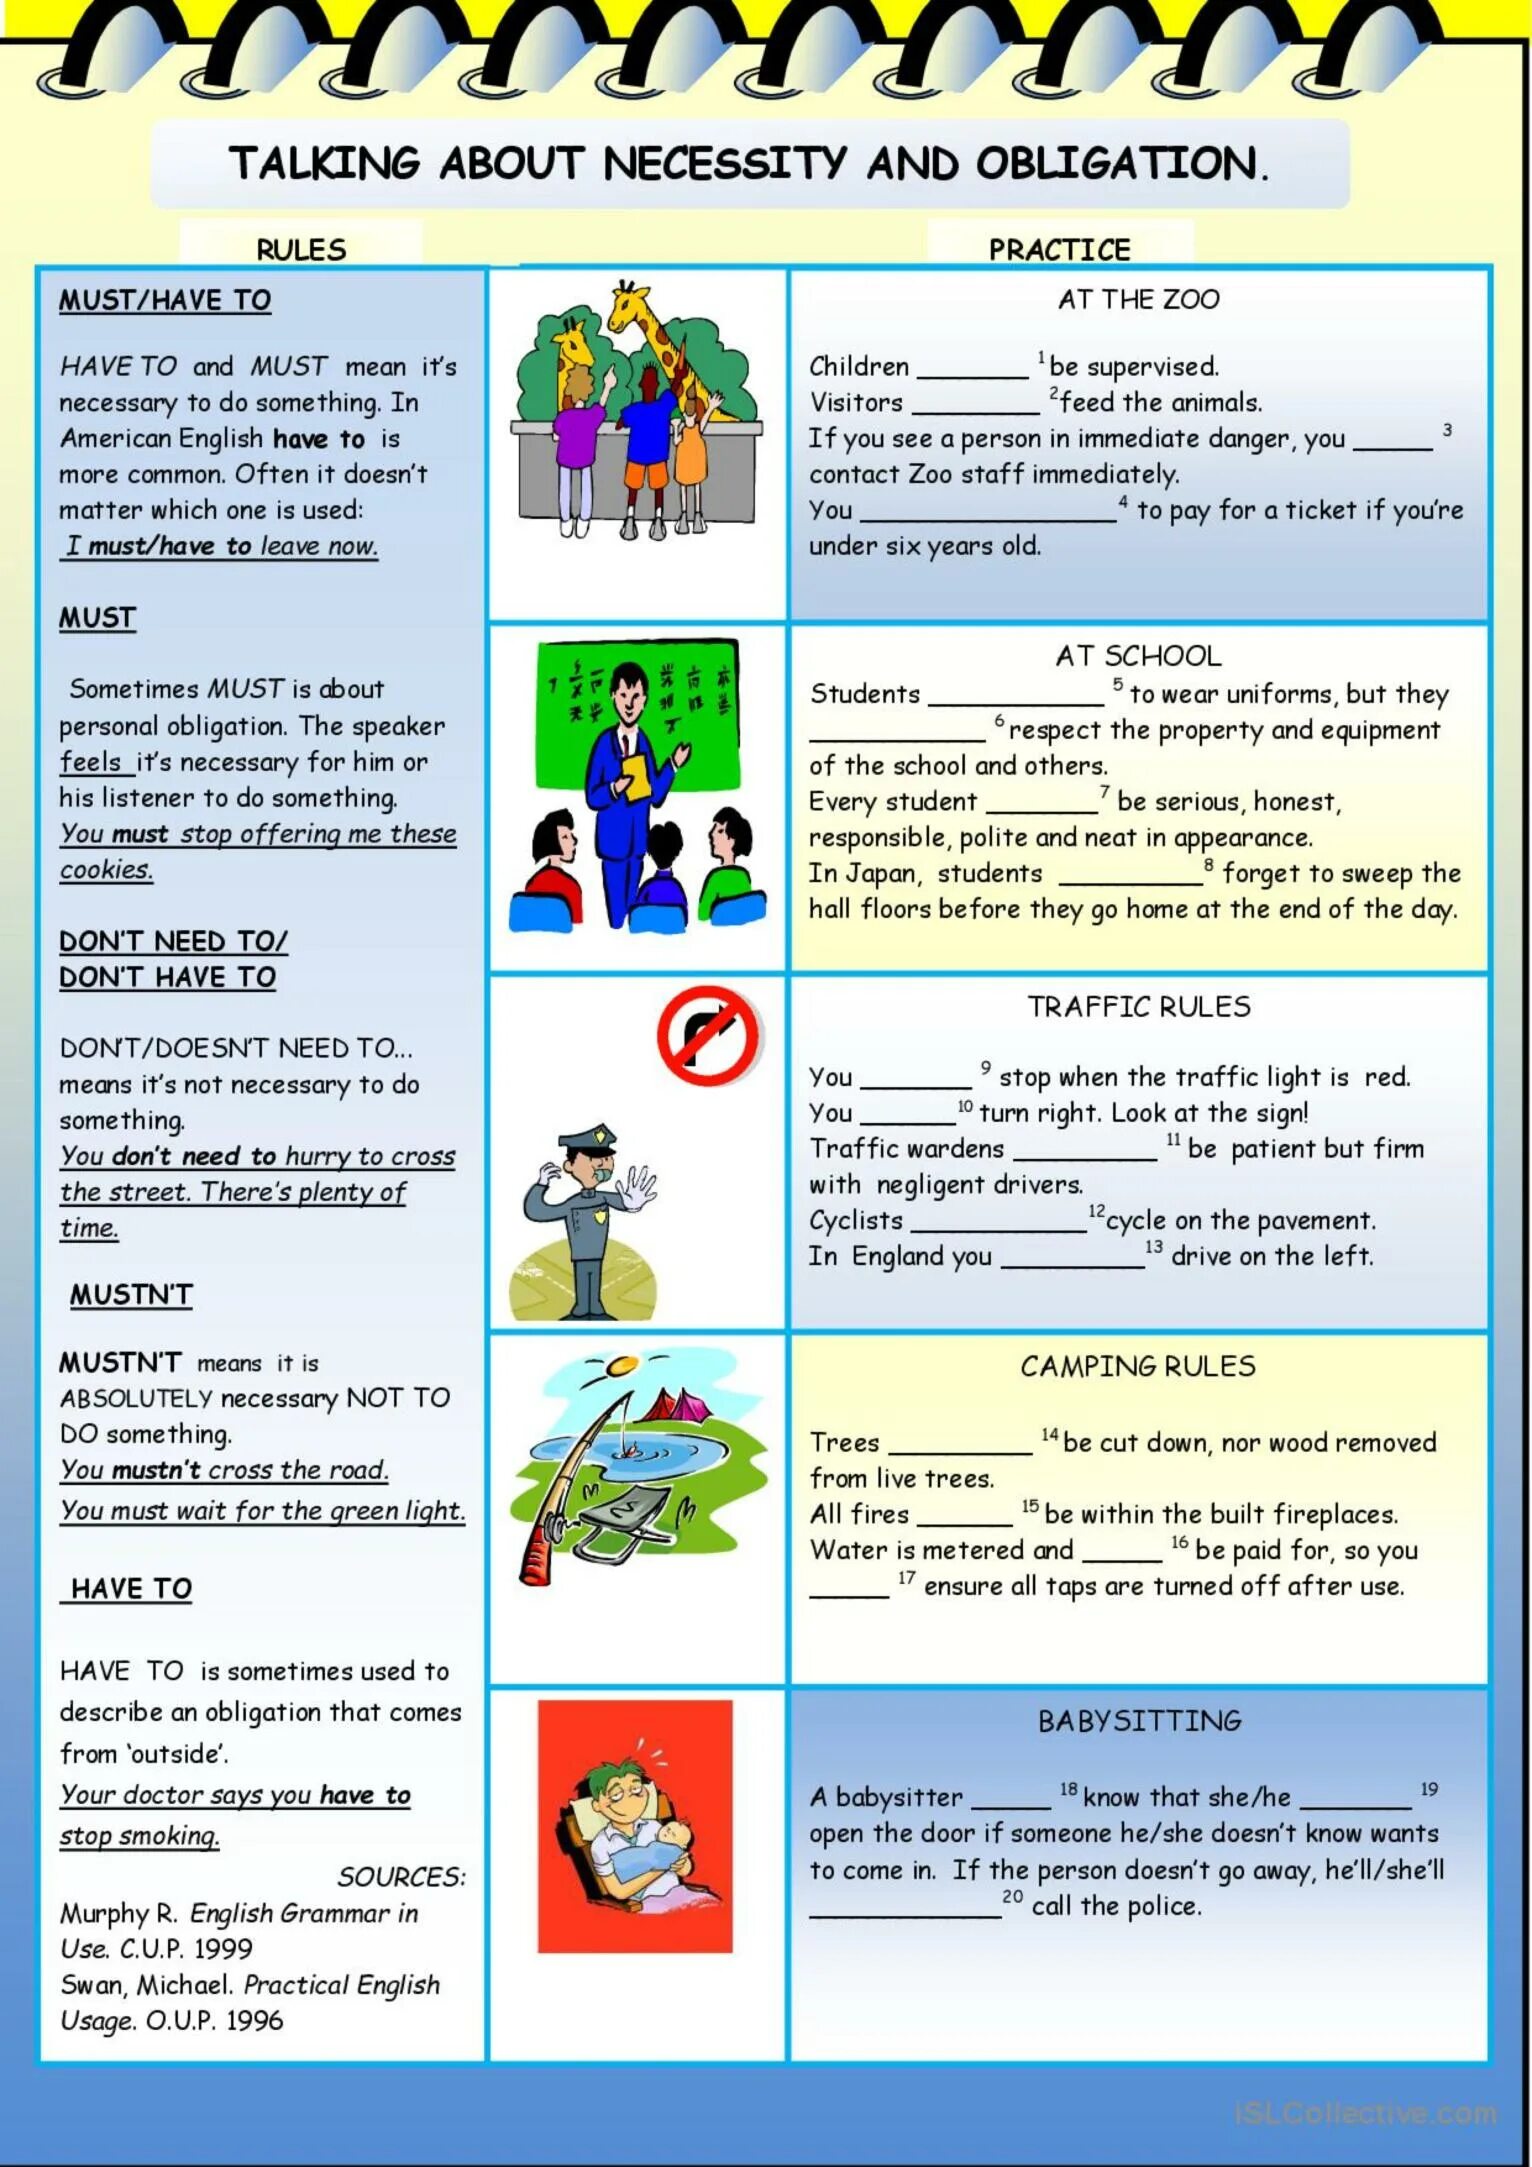 May worksheets. Модальный глагол must Worksheets. Карточки must have to. Модальные глаголы в английском языке Worksheets. Модальные глаголы can must Worksheets.